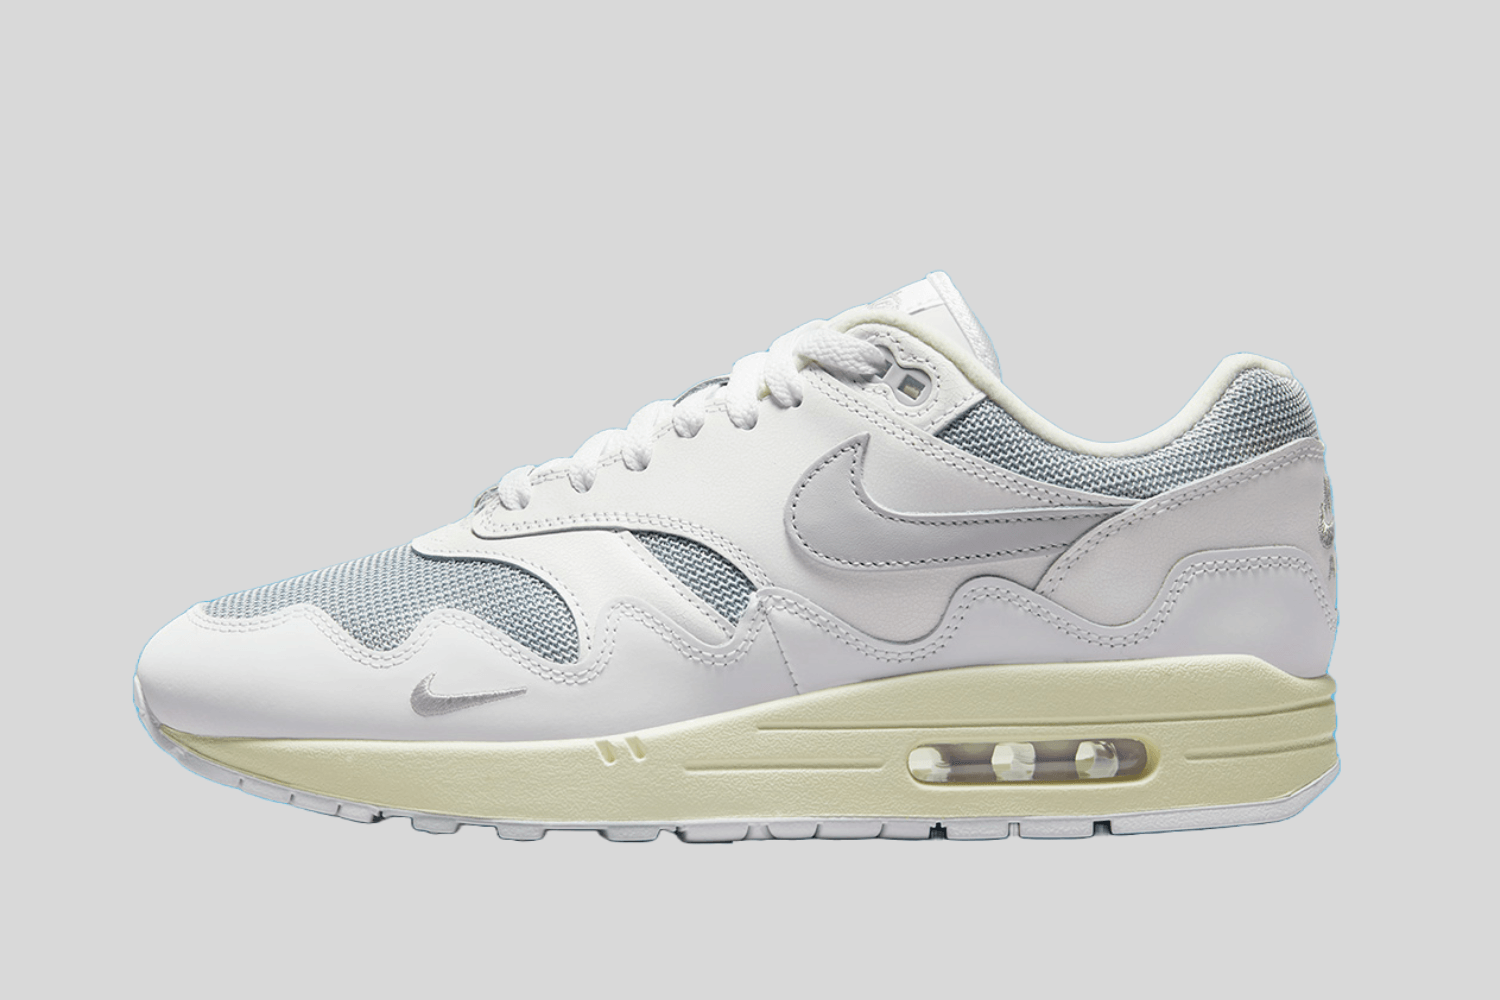 Patta x Nike Air Max 1 - The Wave 'White' official images revealed